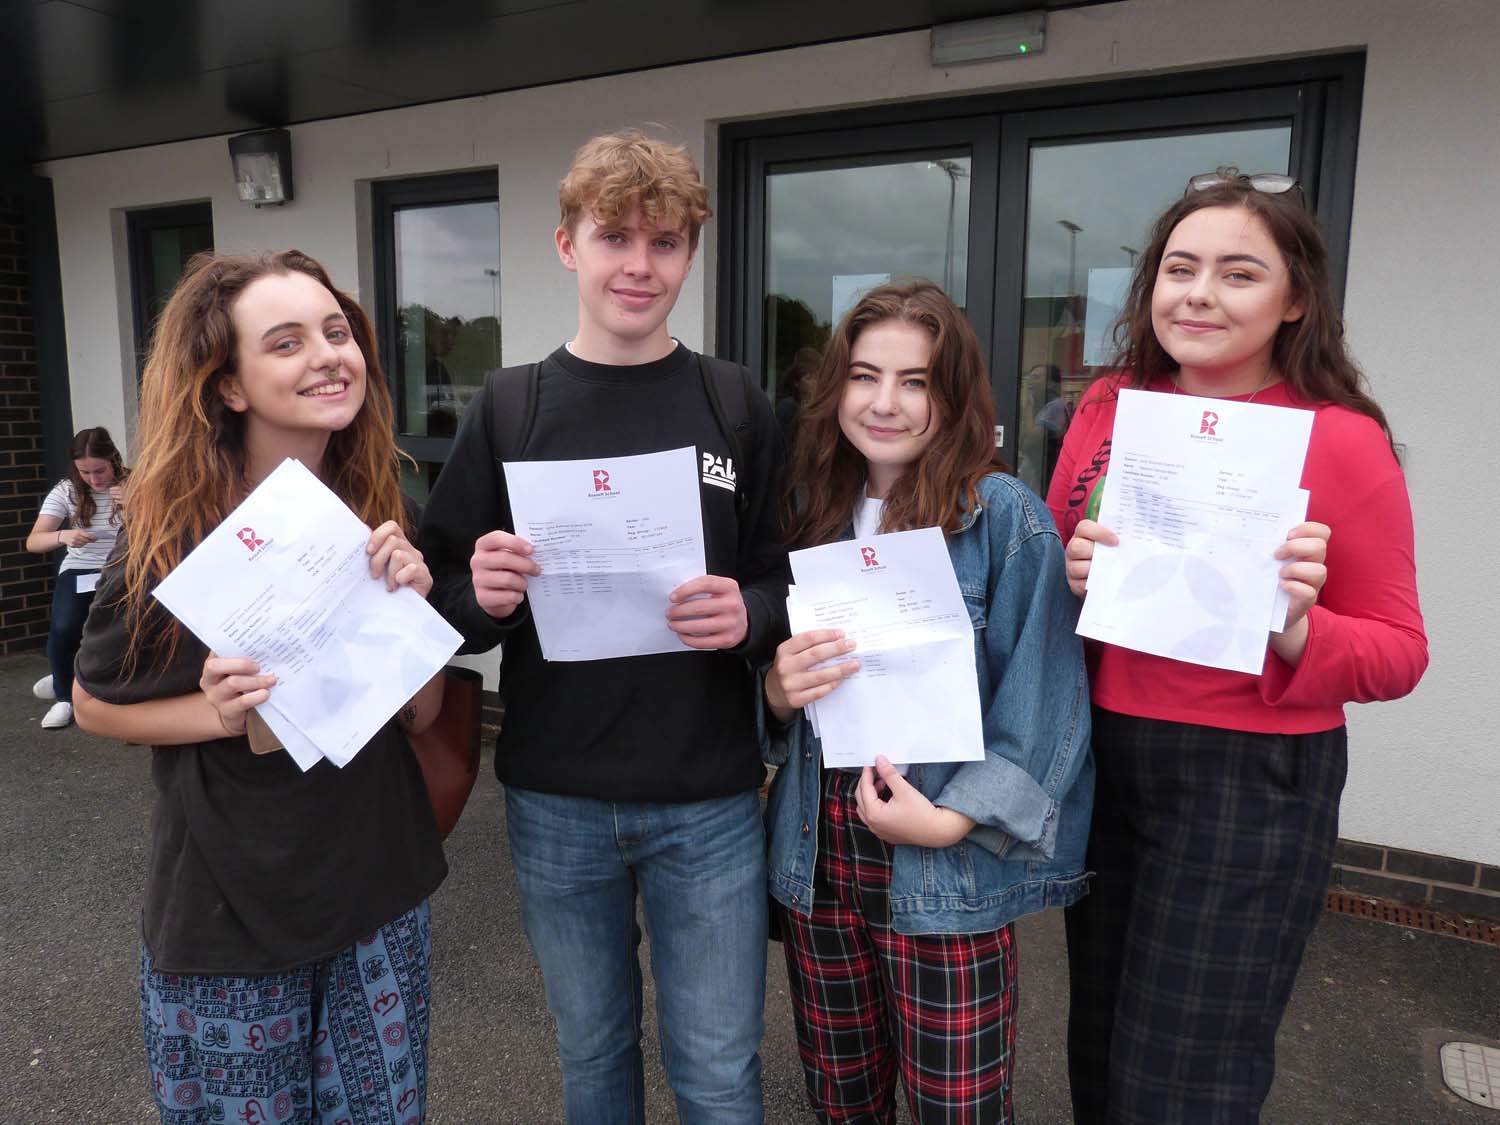 Courtney Chatten, Jacob Leach, Eilidh Kirk and Natasha Moran were pleased with their grades and will stay on for Sixth Form at Rossett, except Courtney who takes up a place studying Zoology at Askham Bryan College